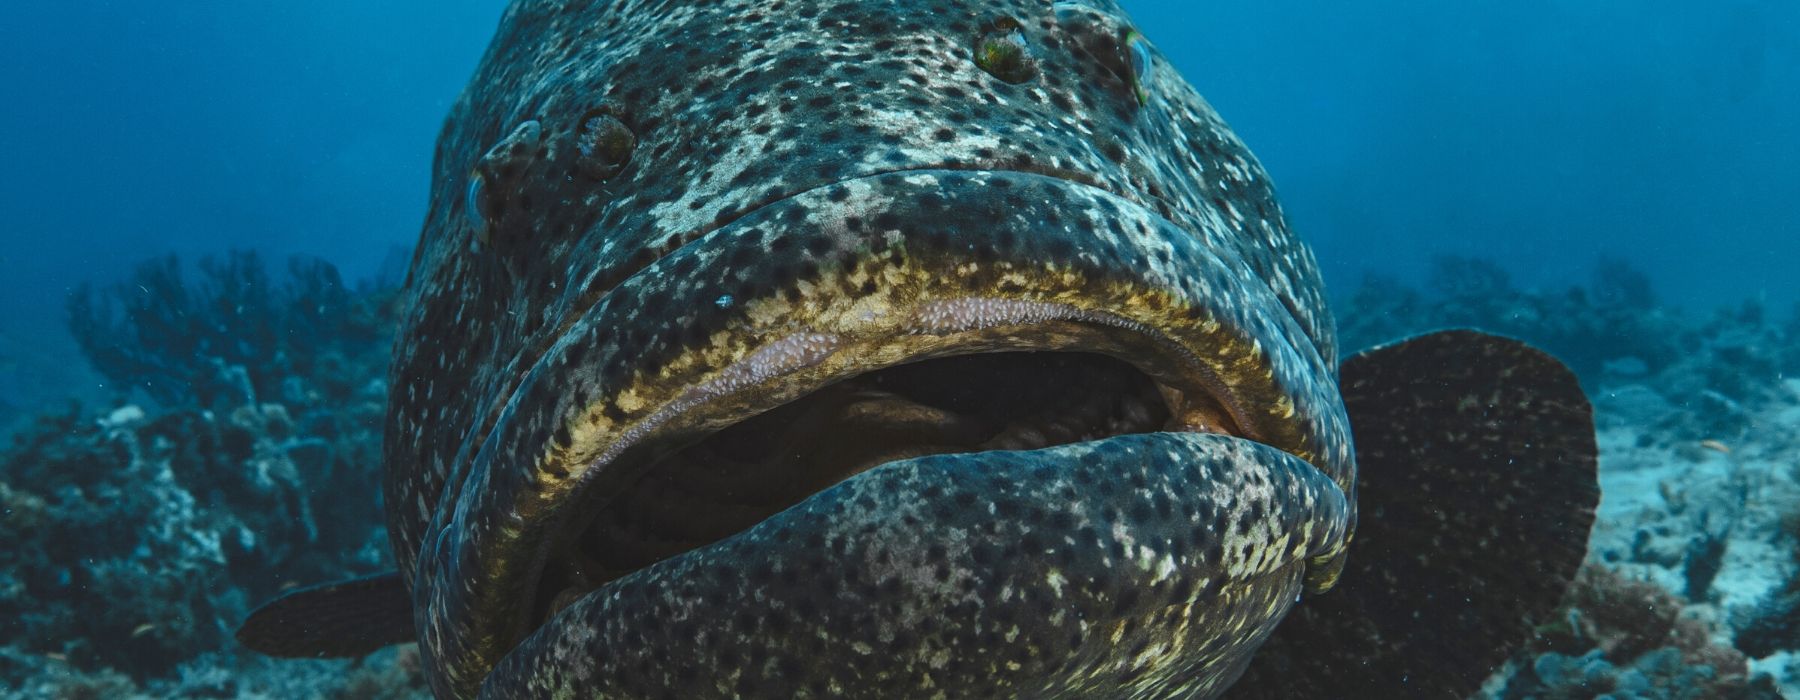 image of large fish showing open mouth